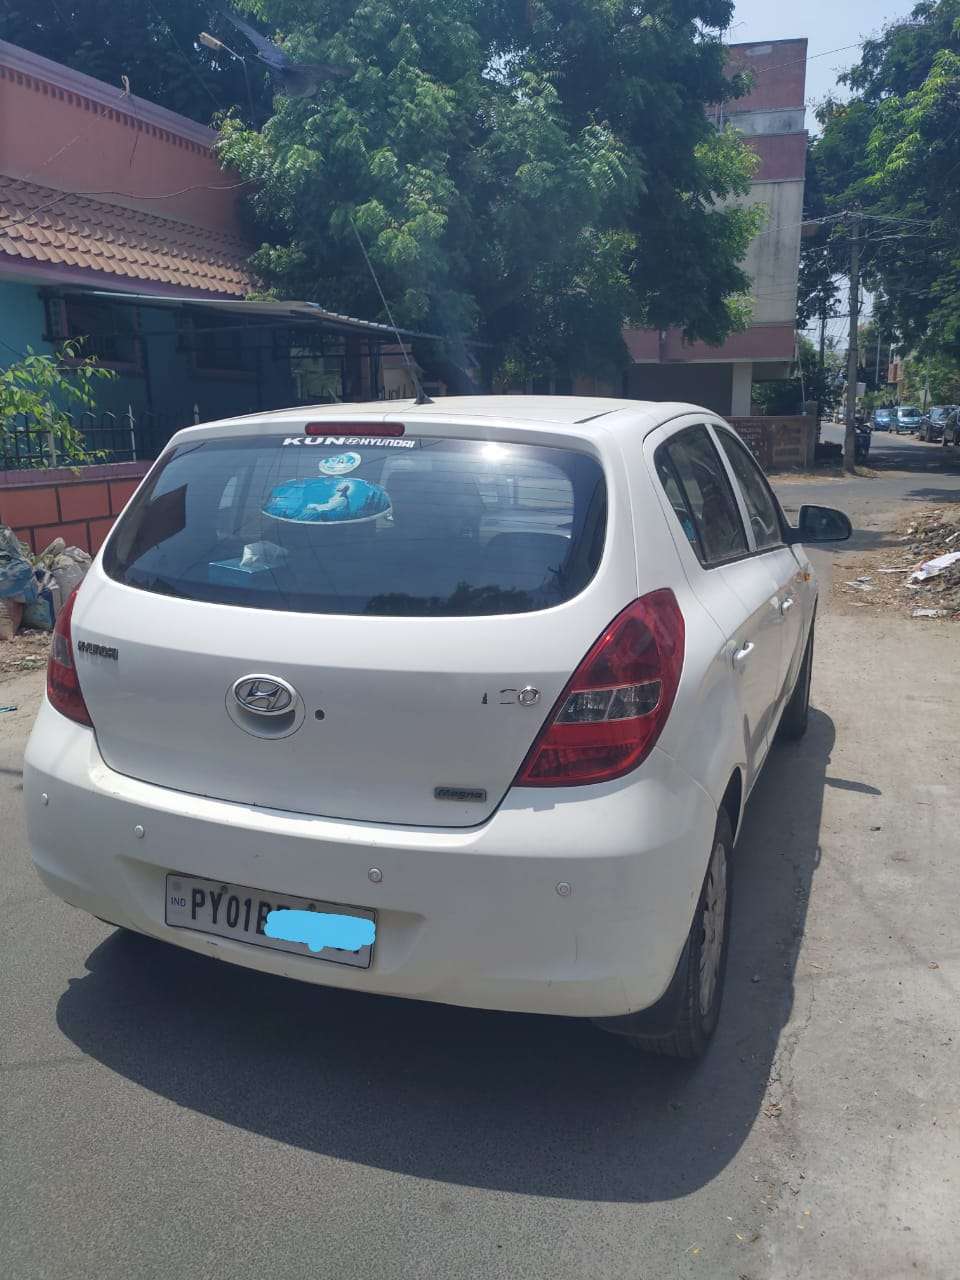 2958-for-sale-Hyundai-i20-Petrol-First-Owner-2010-PY-registered-rs-238000